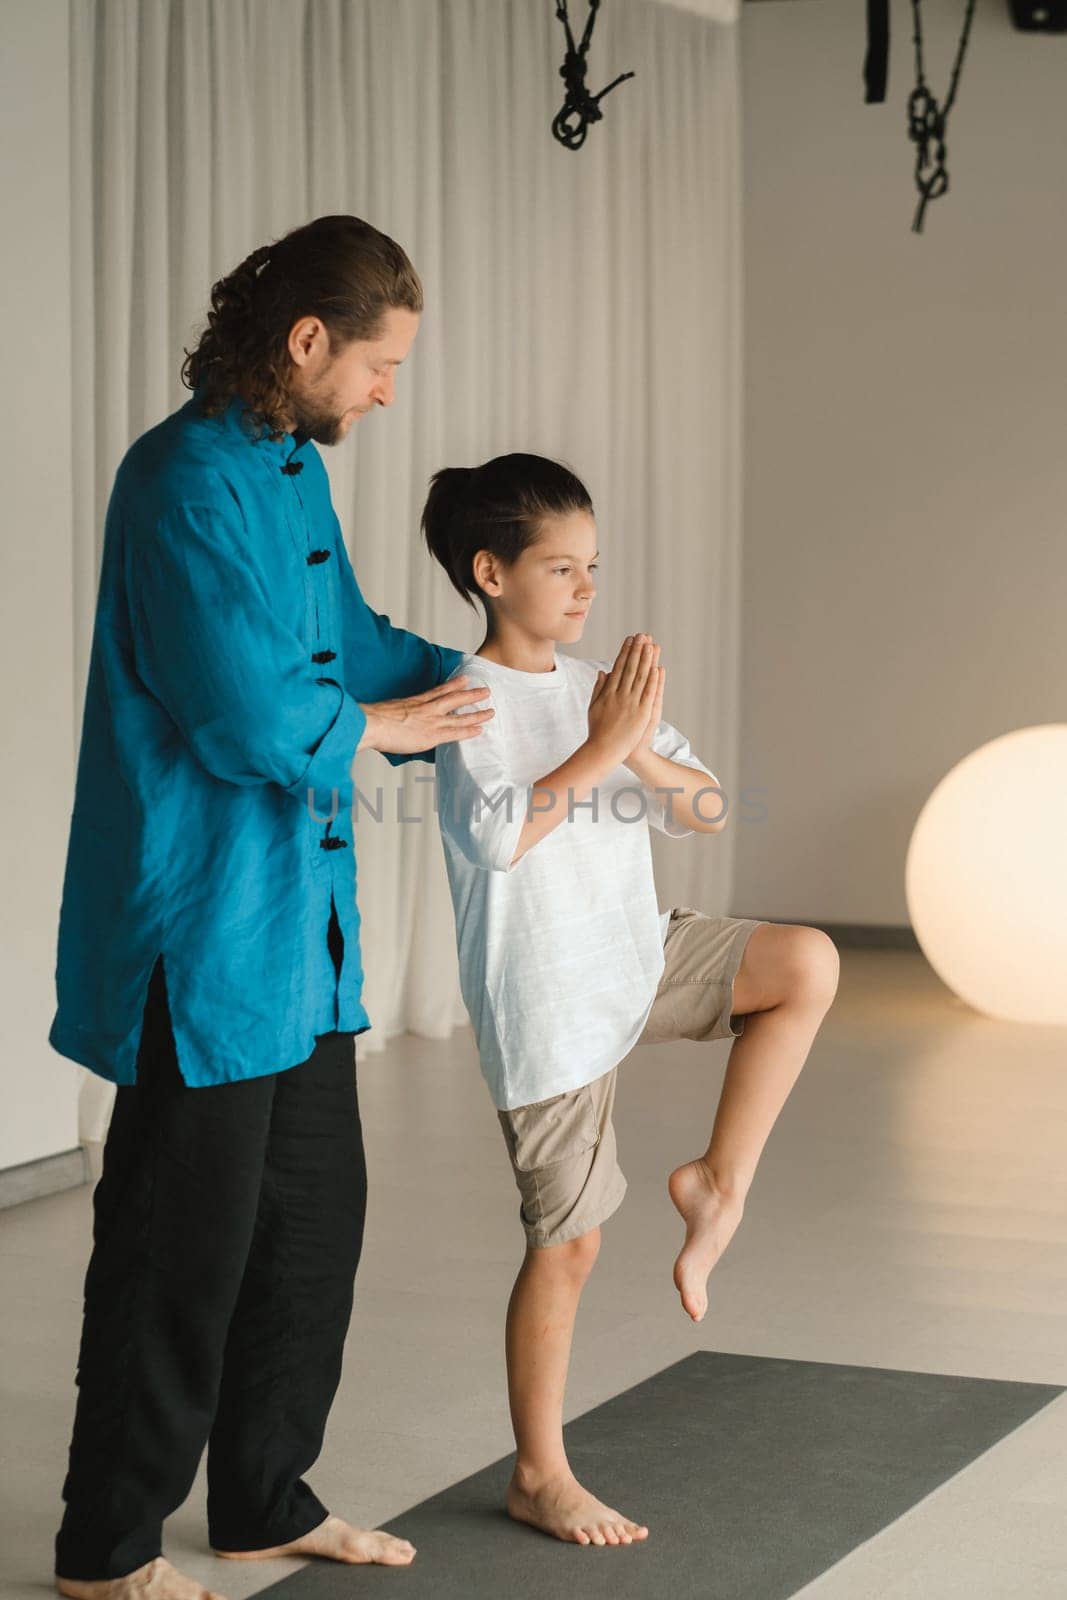 A yoga instructor in training helps a child to do exercises in the gym.